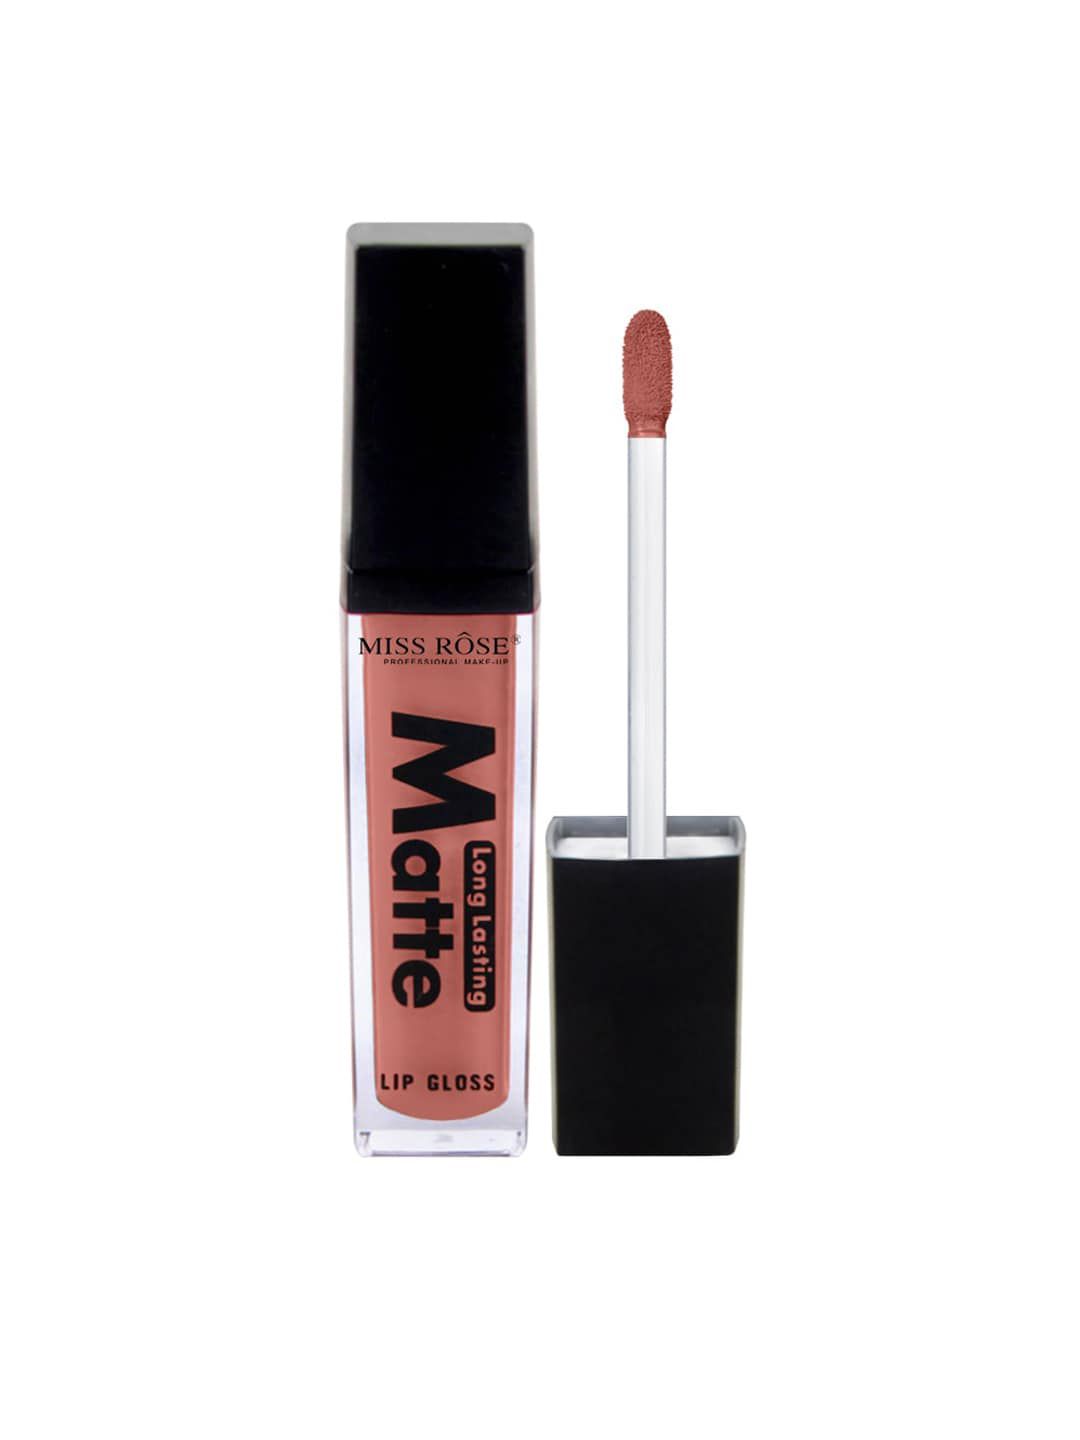 MISS ROSE Matte Long Lasting LipGloss 7701-002M 20 20 gm Price in India